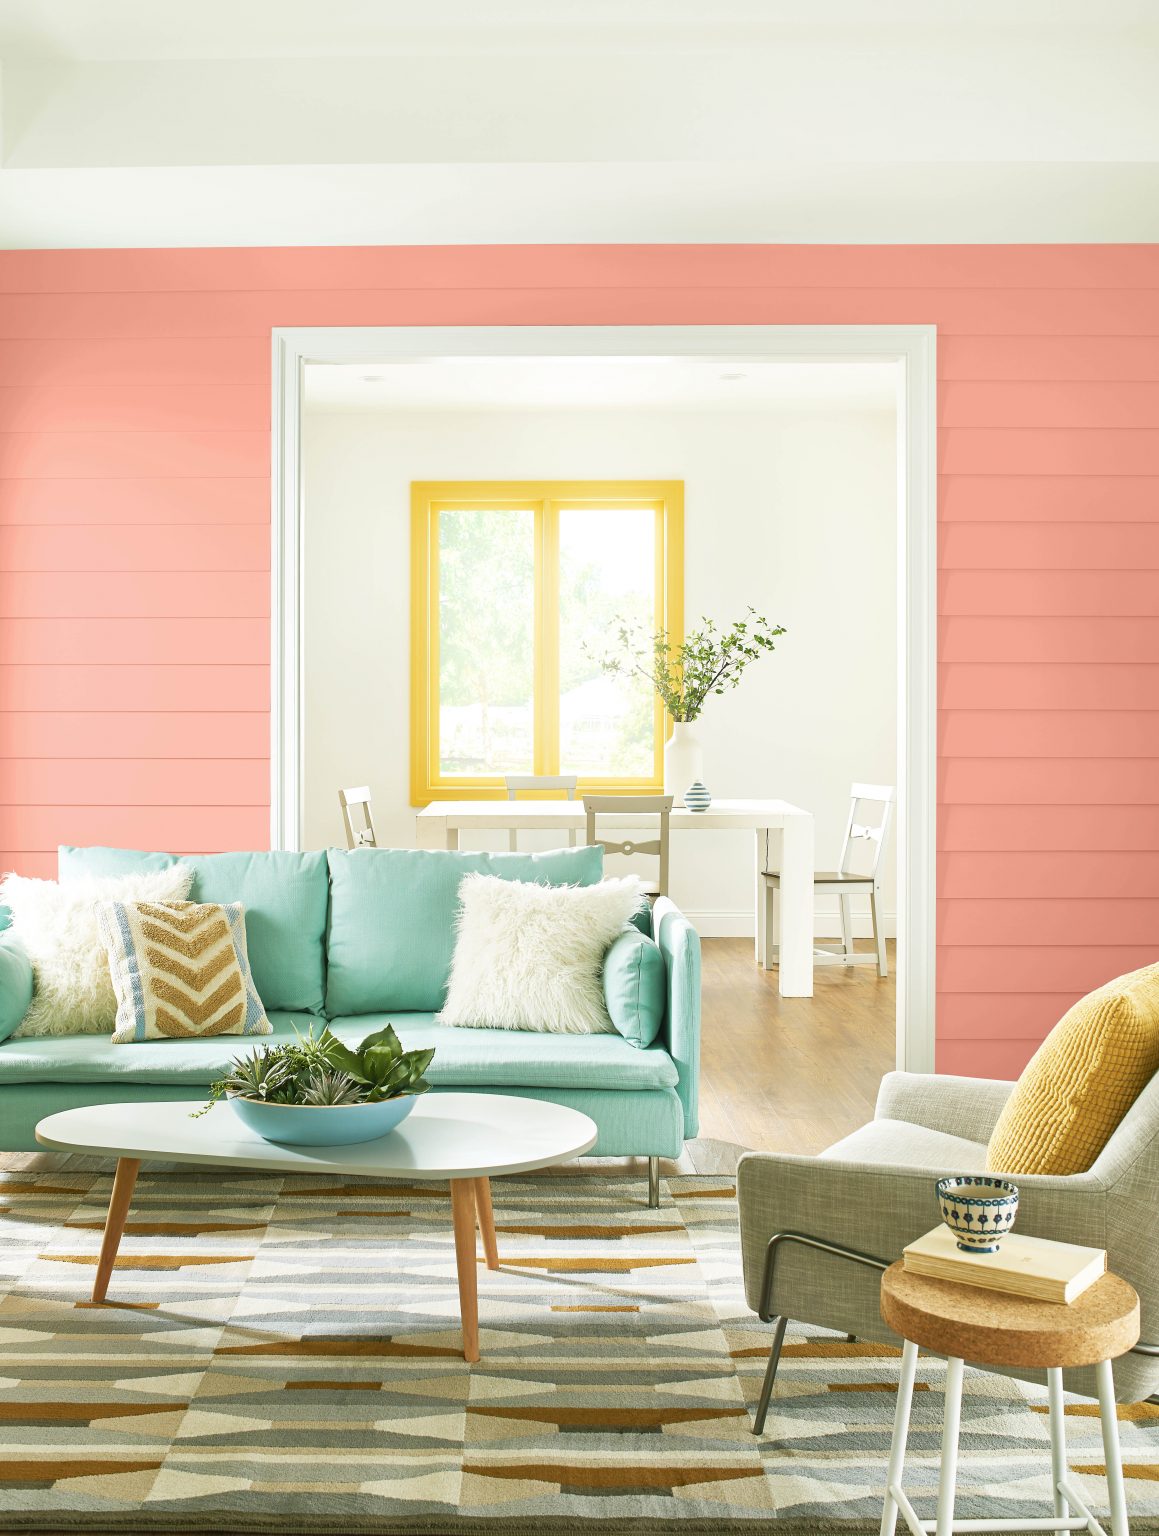 A coastal living room with walls in the colour Peach Mimosa, window trim in Radiant Sun, and styled with aqua and neutral accents 